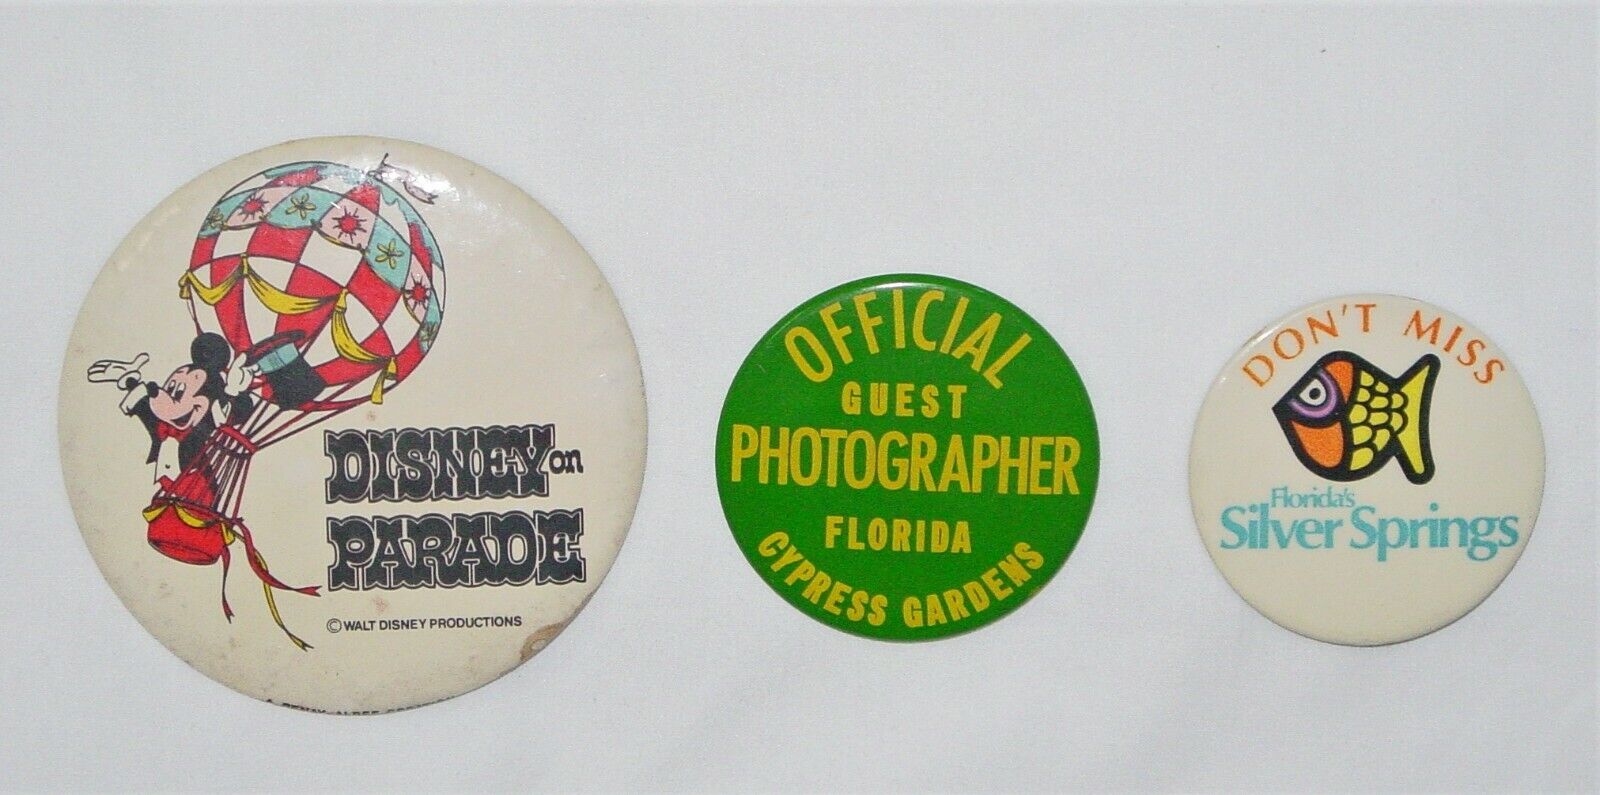 3 VINTAGE STATE OF FLORIDA BUTTONS-DISNEY-CYPRESS GARDENS-SILVER SPRINGS